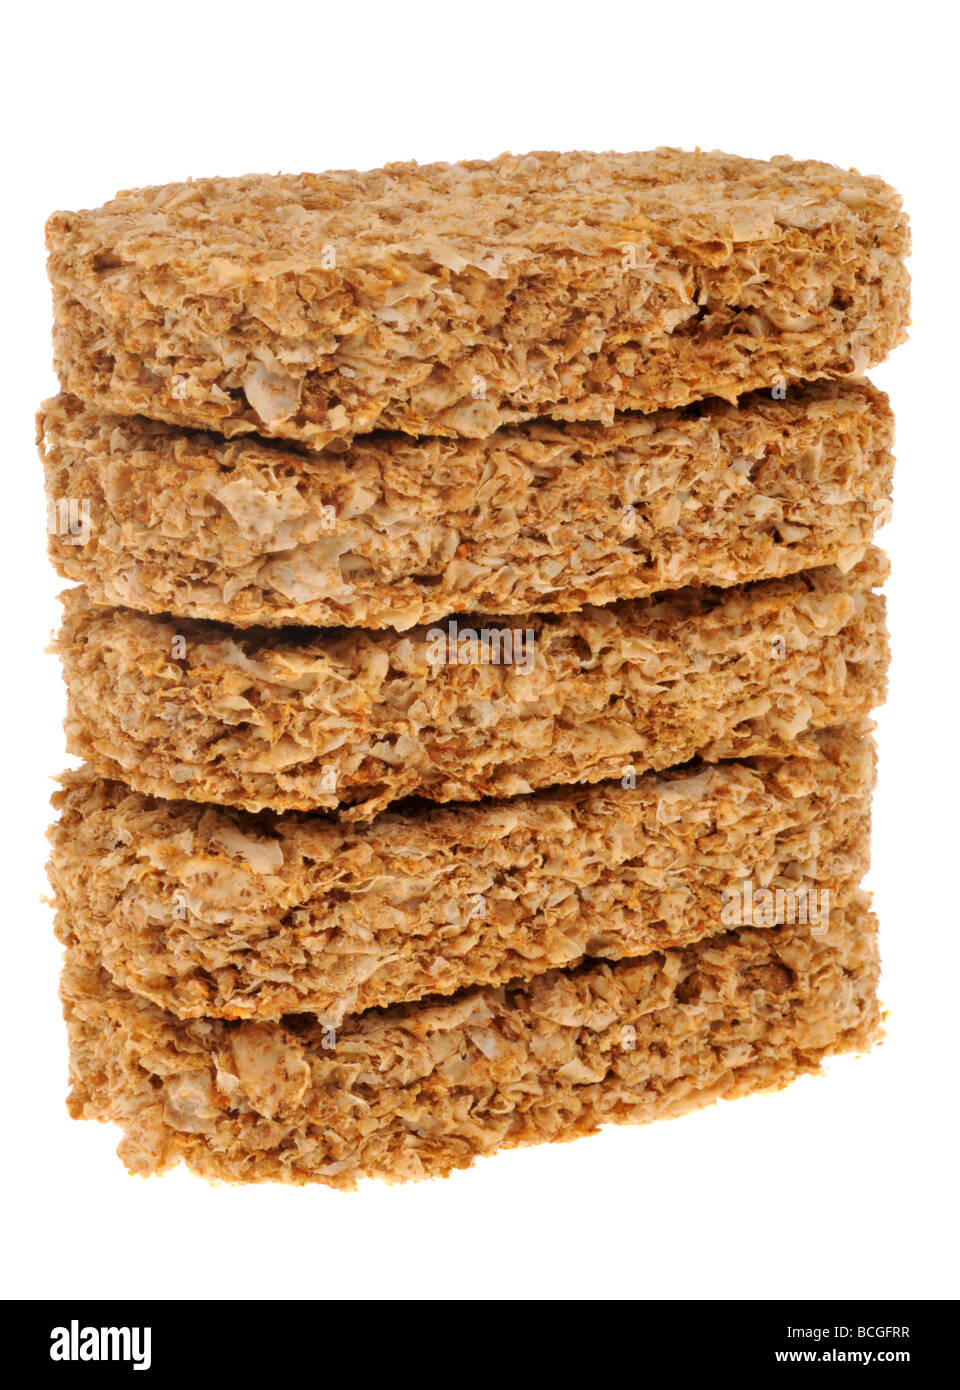 Wheat biscuit cereal Stock Photo